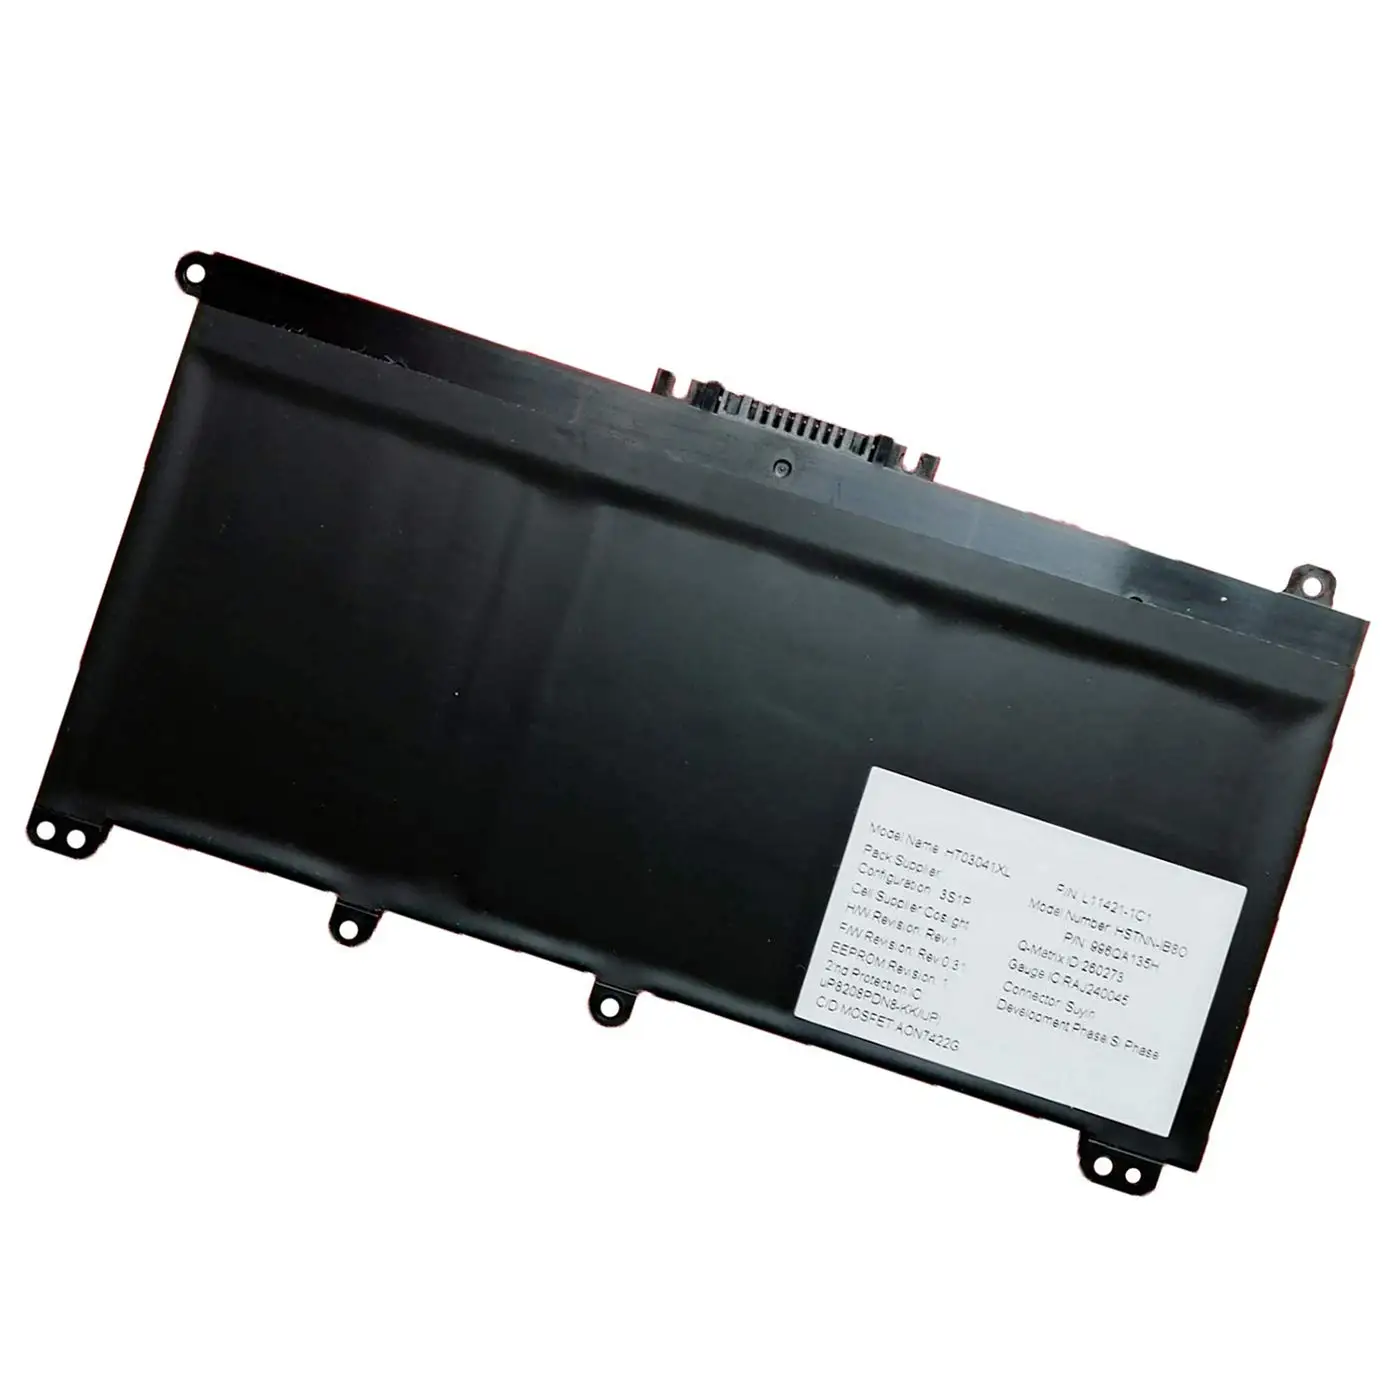 Oogverblindend Nominaal Accor 11.4v 41.04wh 3600mah Laptop Battery For Hp Ht03xl 14-ce0025tu 14-ce0034tx  Tpn-c135 Tpn-c136 Tpn-i130 Tpn-i131 Tpn-i132 - Buy Ht03xl Battery,Replacement  Laptop Battery For Hp Tpn-i130,Ht03xl Battery For Hp Product on Alibaba.com